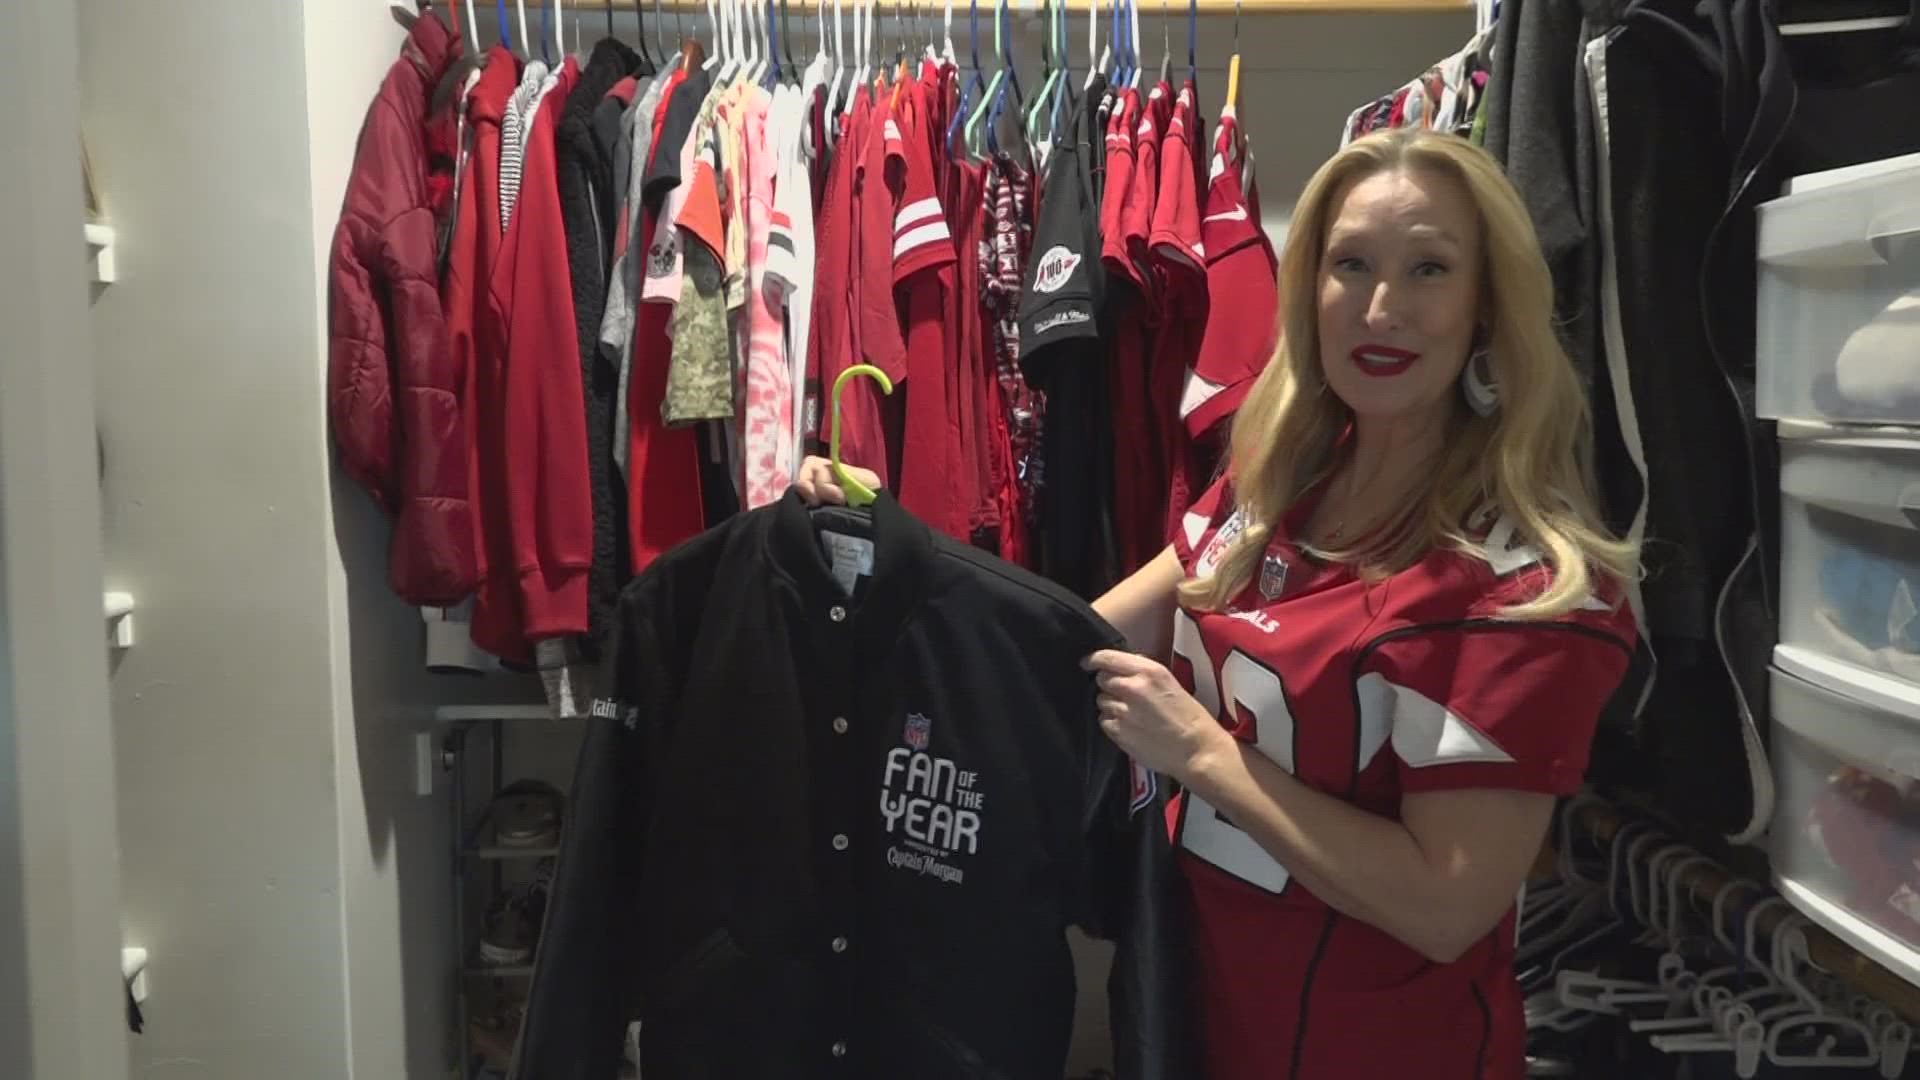 A Valley woman is among the nominees selected for this year's NFL fan of the year.